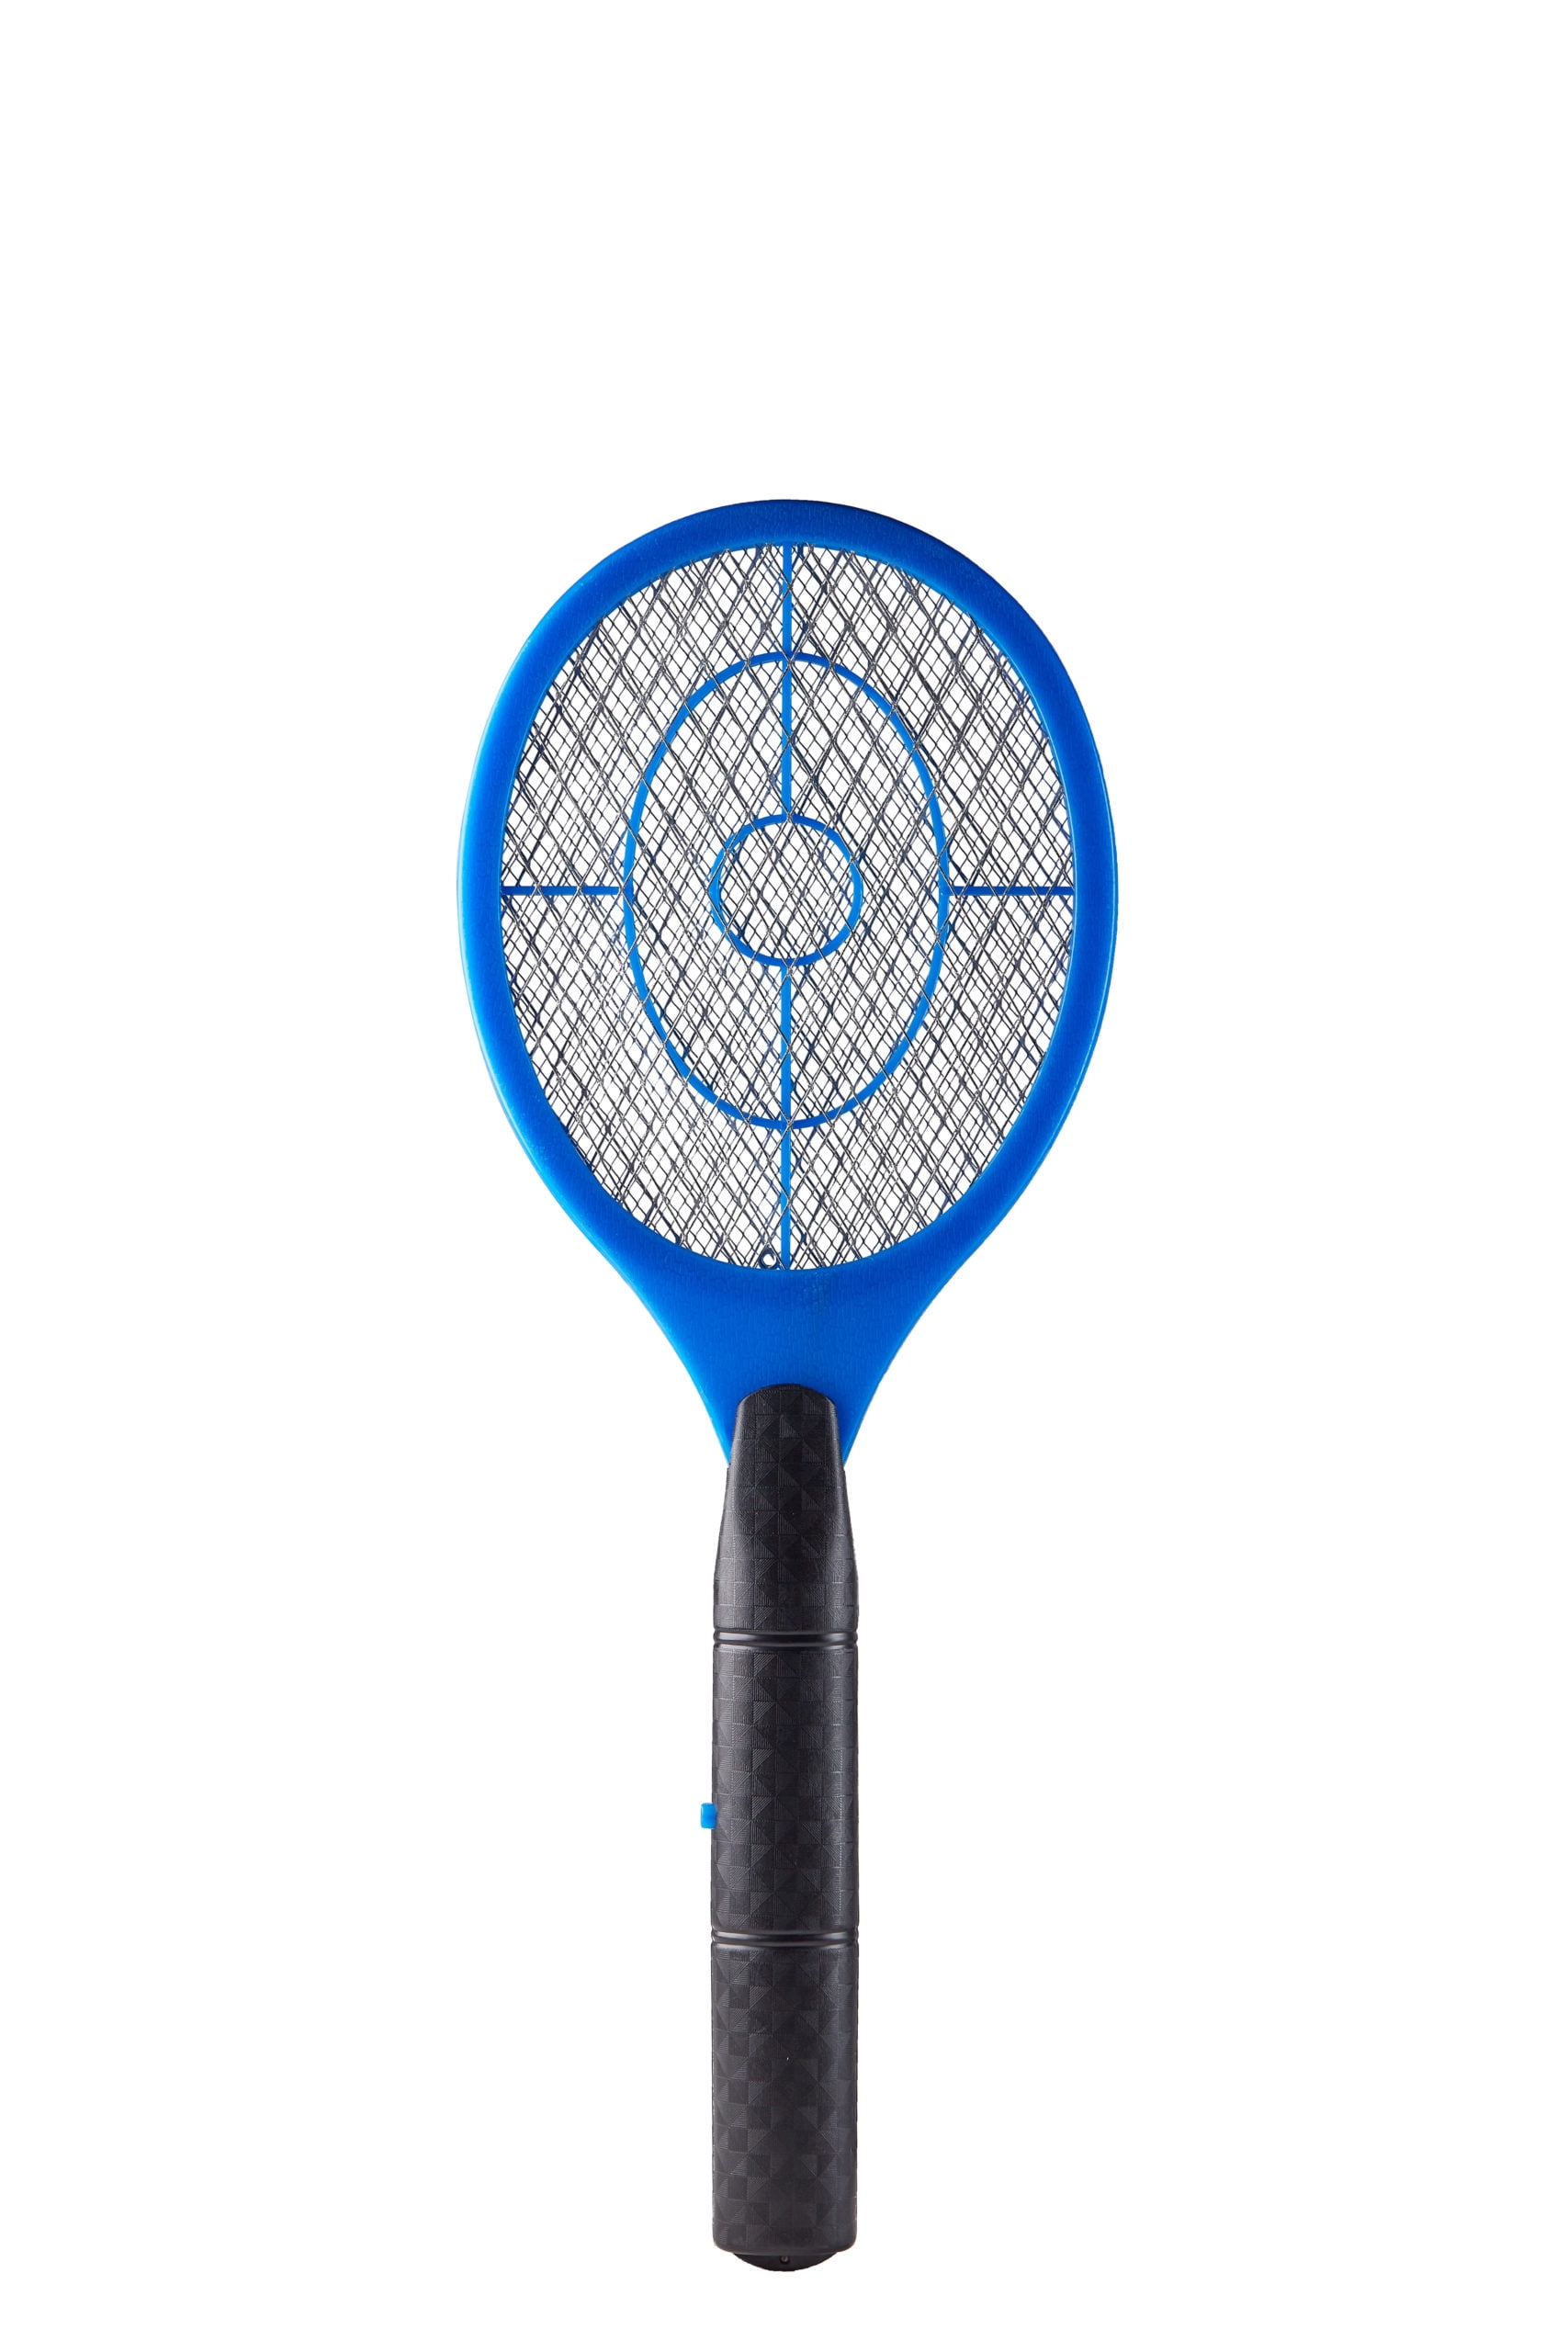 PIC Handheld Mosquito and Flying Insect Bug Zapper CMP1936 Black/Blue 